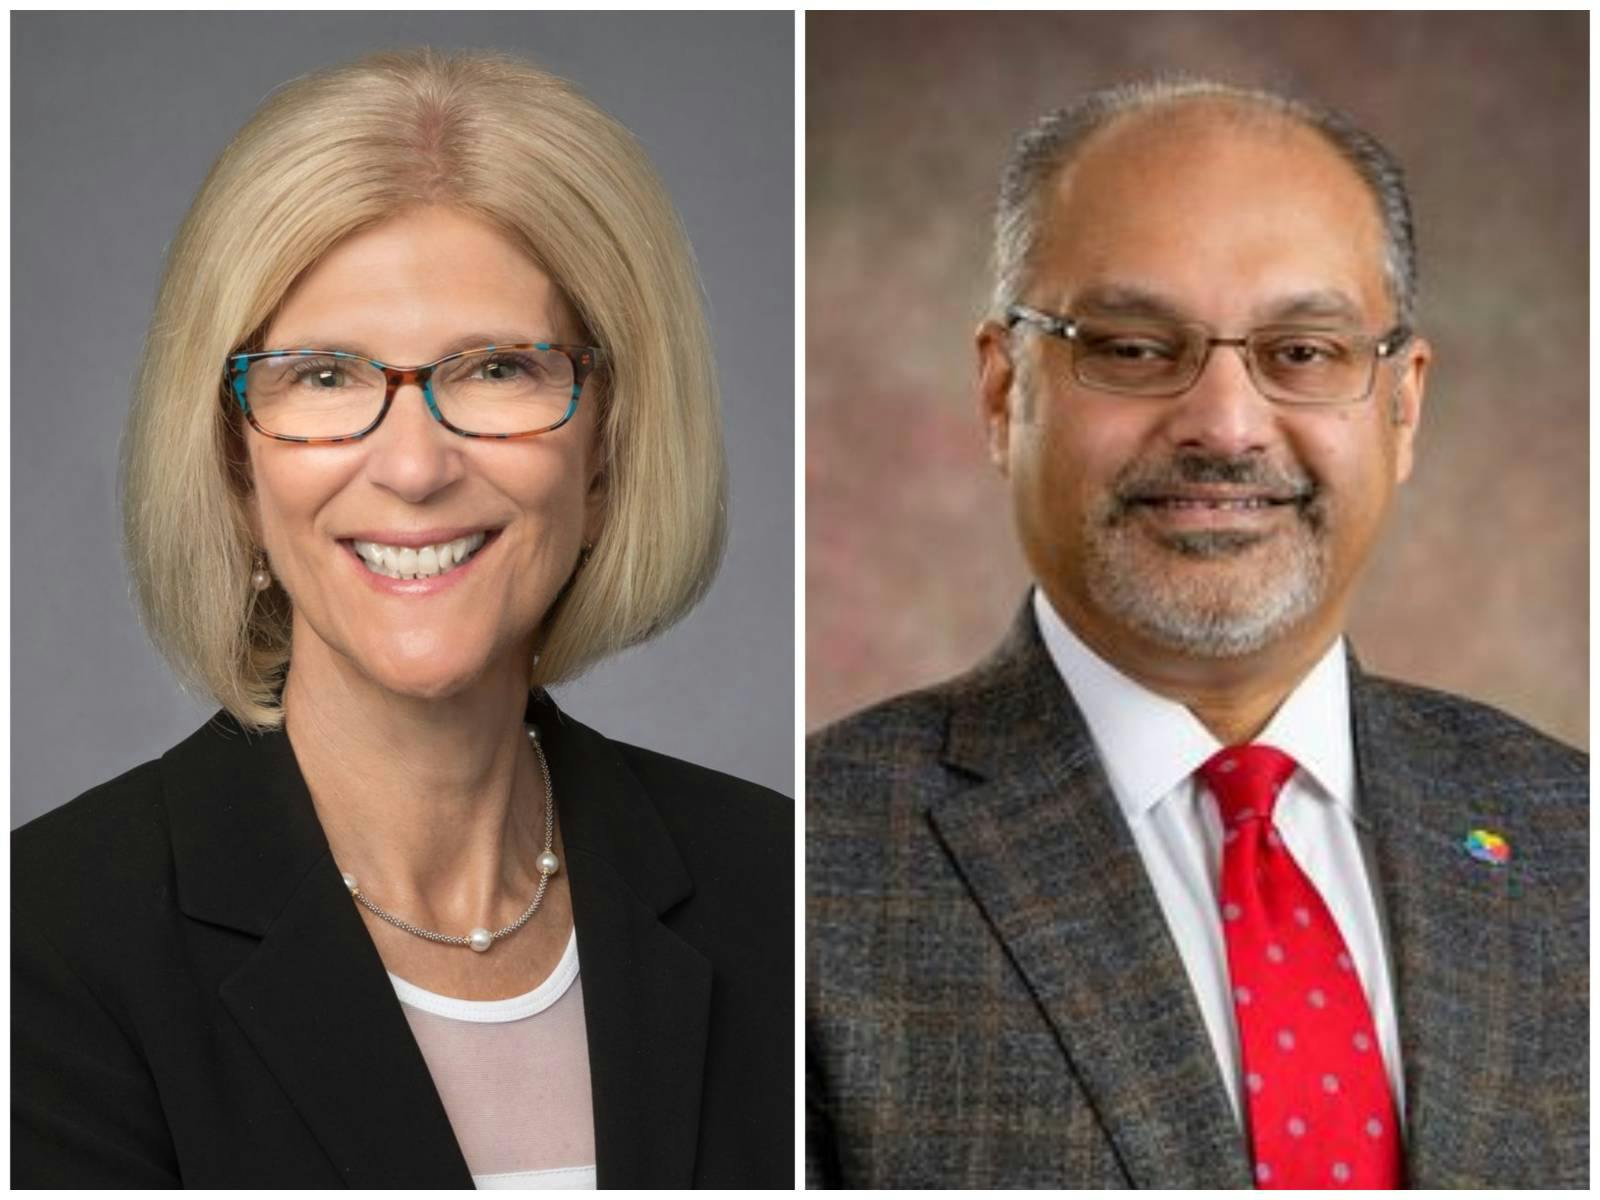 Froedtert Health CEO Cathy Jacobson and ThedaCare CEO Imran Andrabi say the merger of the two systems will provide better healthcare services for patients in Wisconsin. (Images provided by Froedtert Health and ThedaCare)